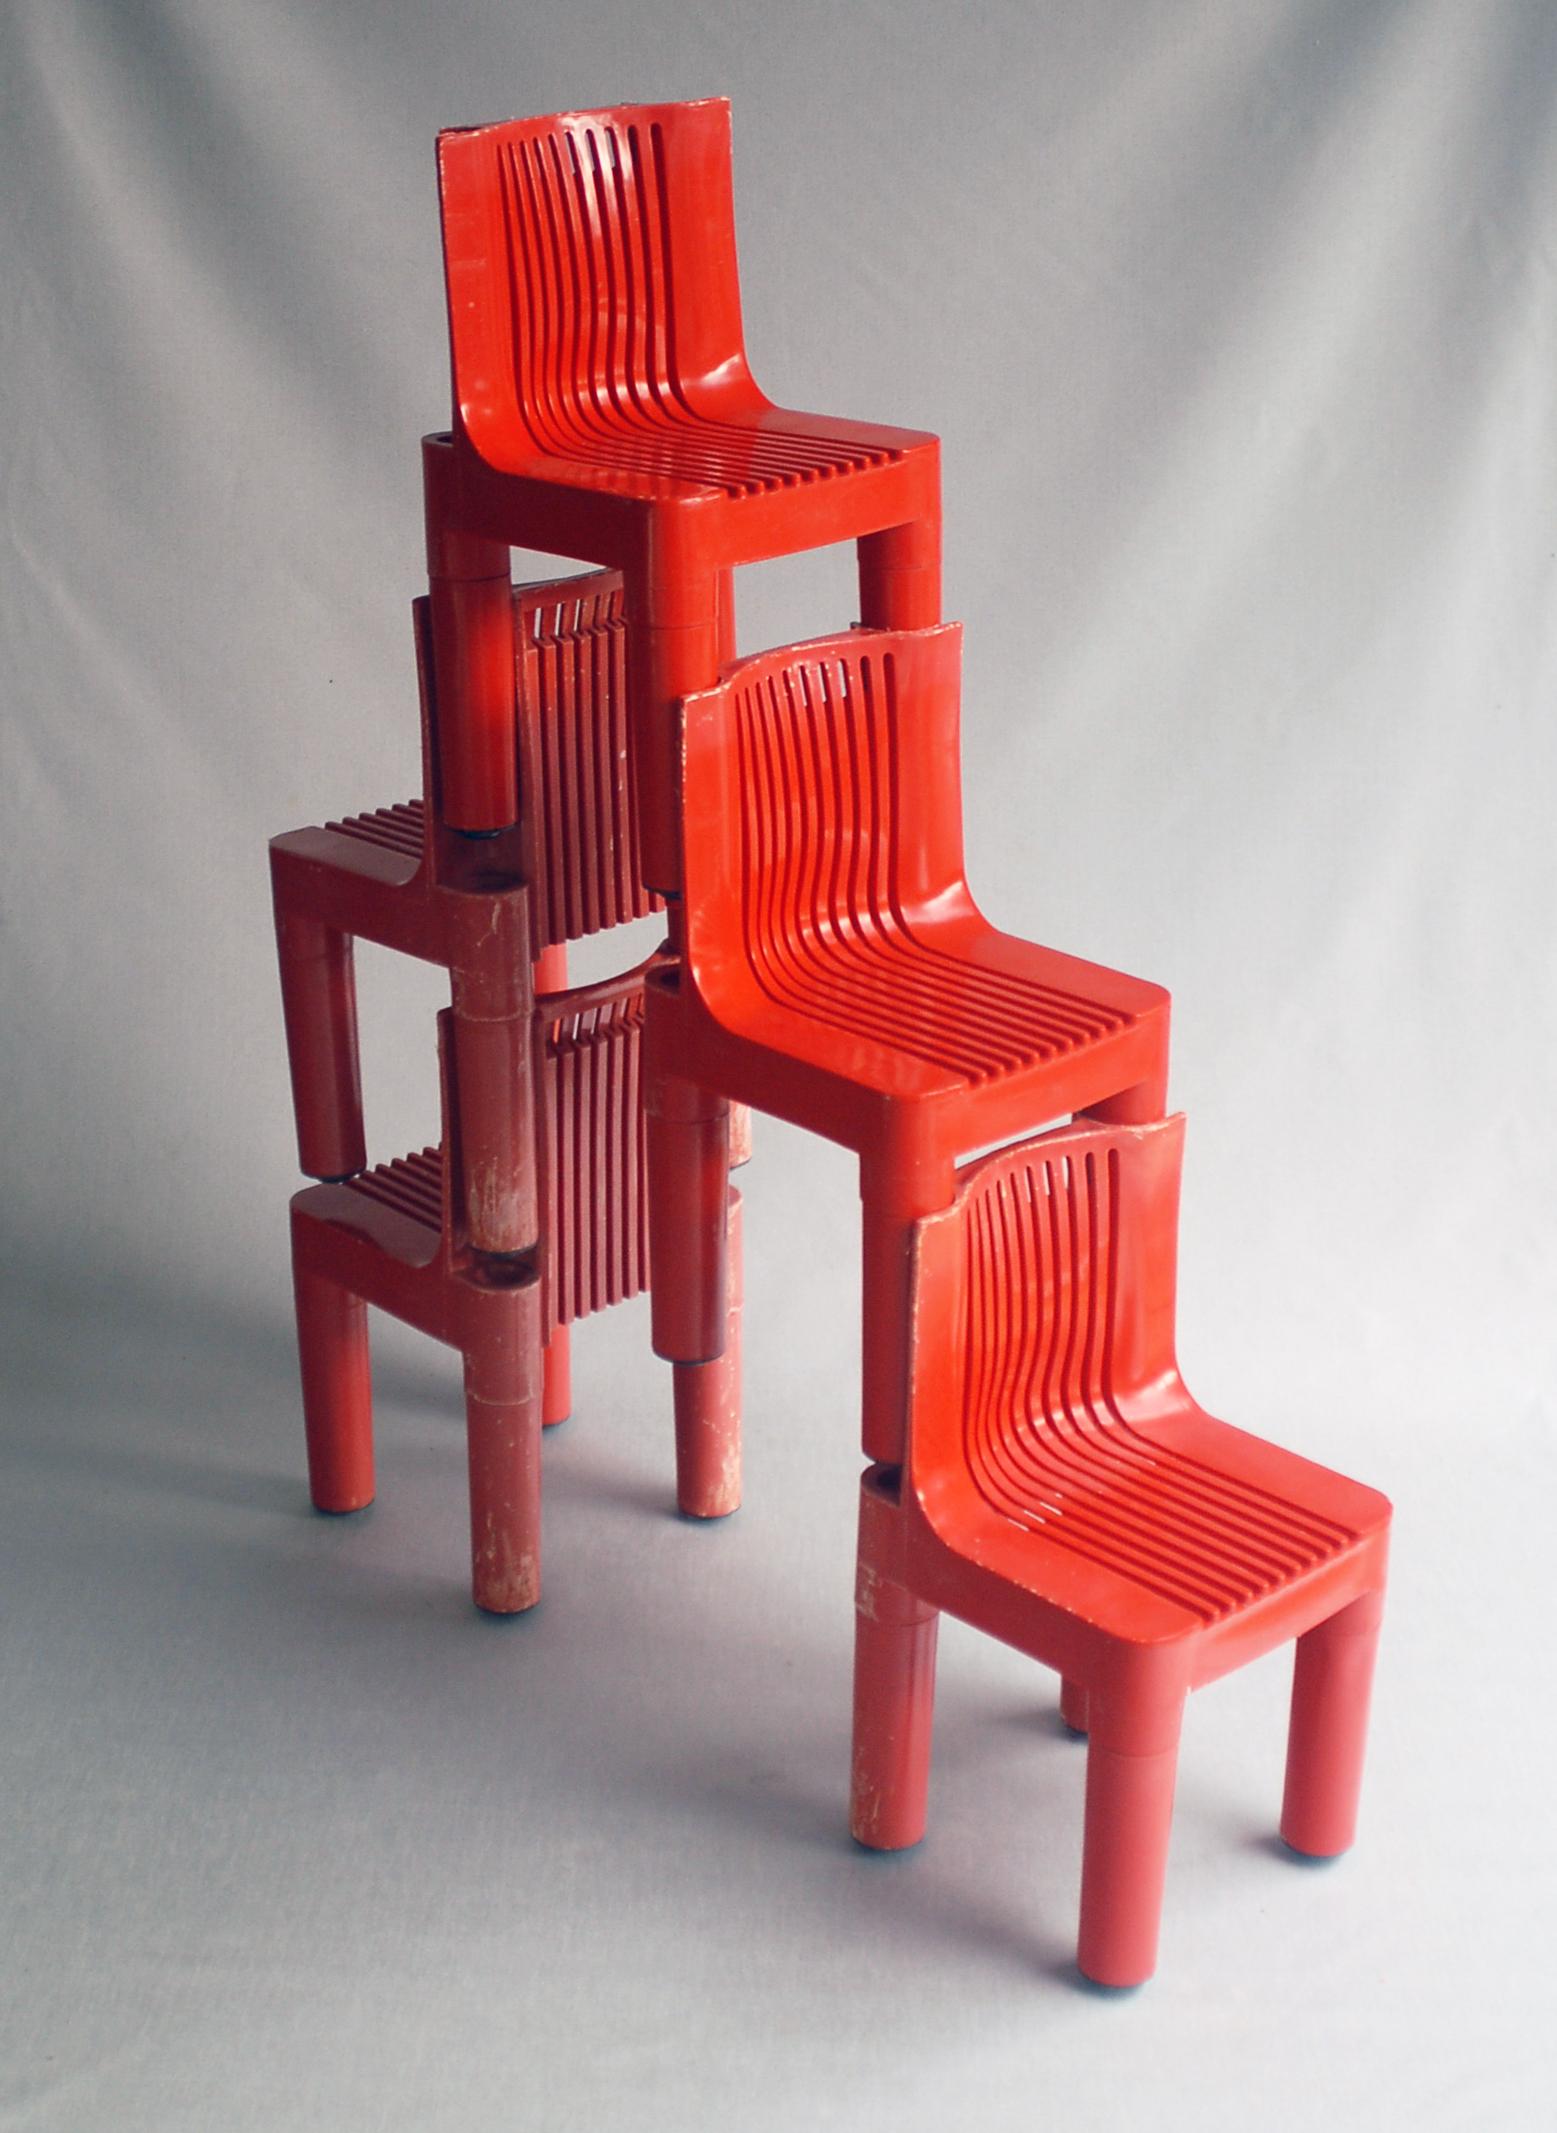 Plastic Chair model 4999 Kartell Marco Zanuso / Richard Sapper 1964 First production 6x For Sale